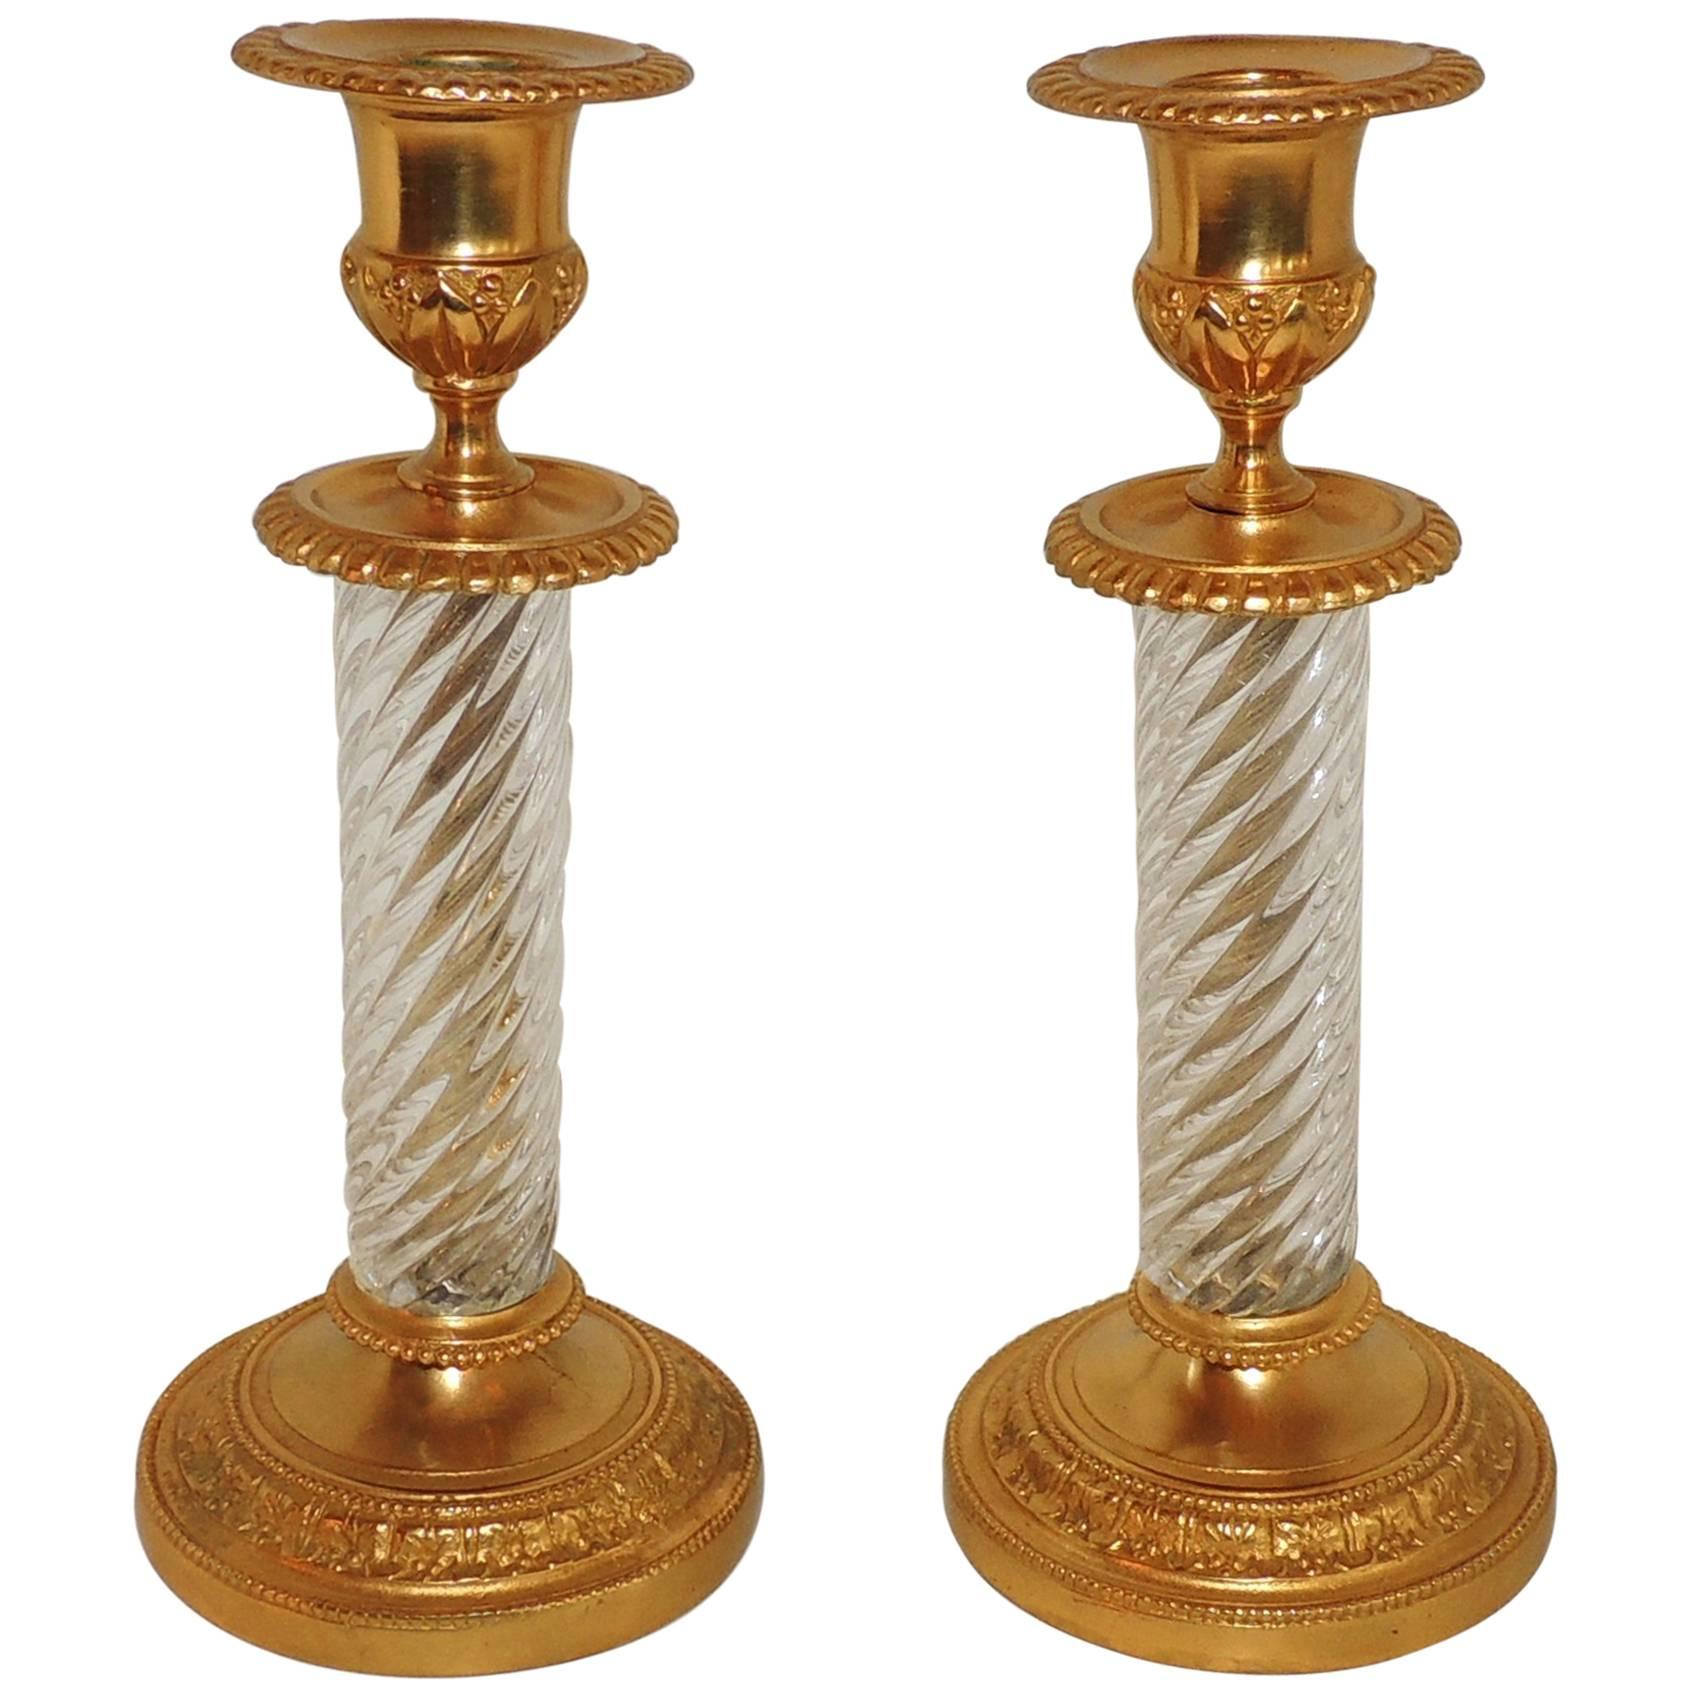 French Pair of Baccarat Empire Doré Cut Crystal Ormolu-Mounted Candlesticks